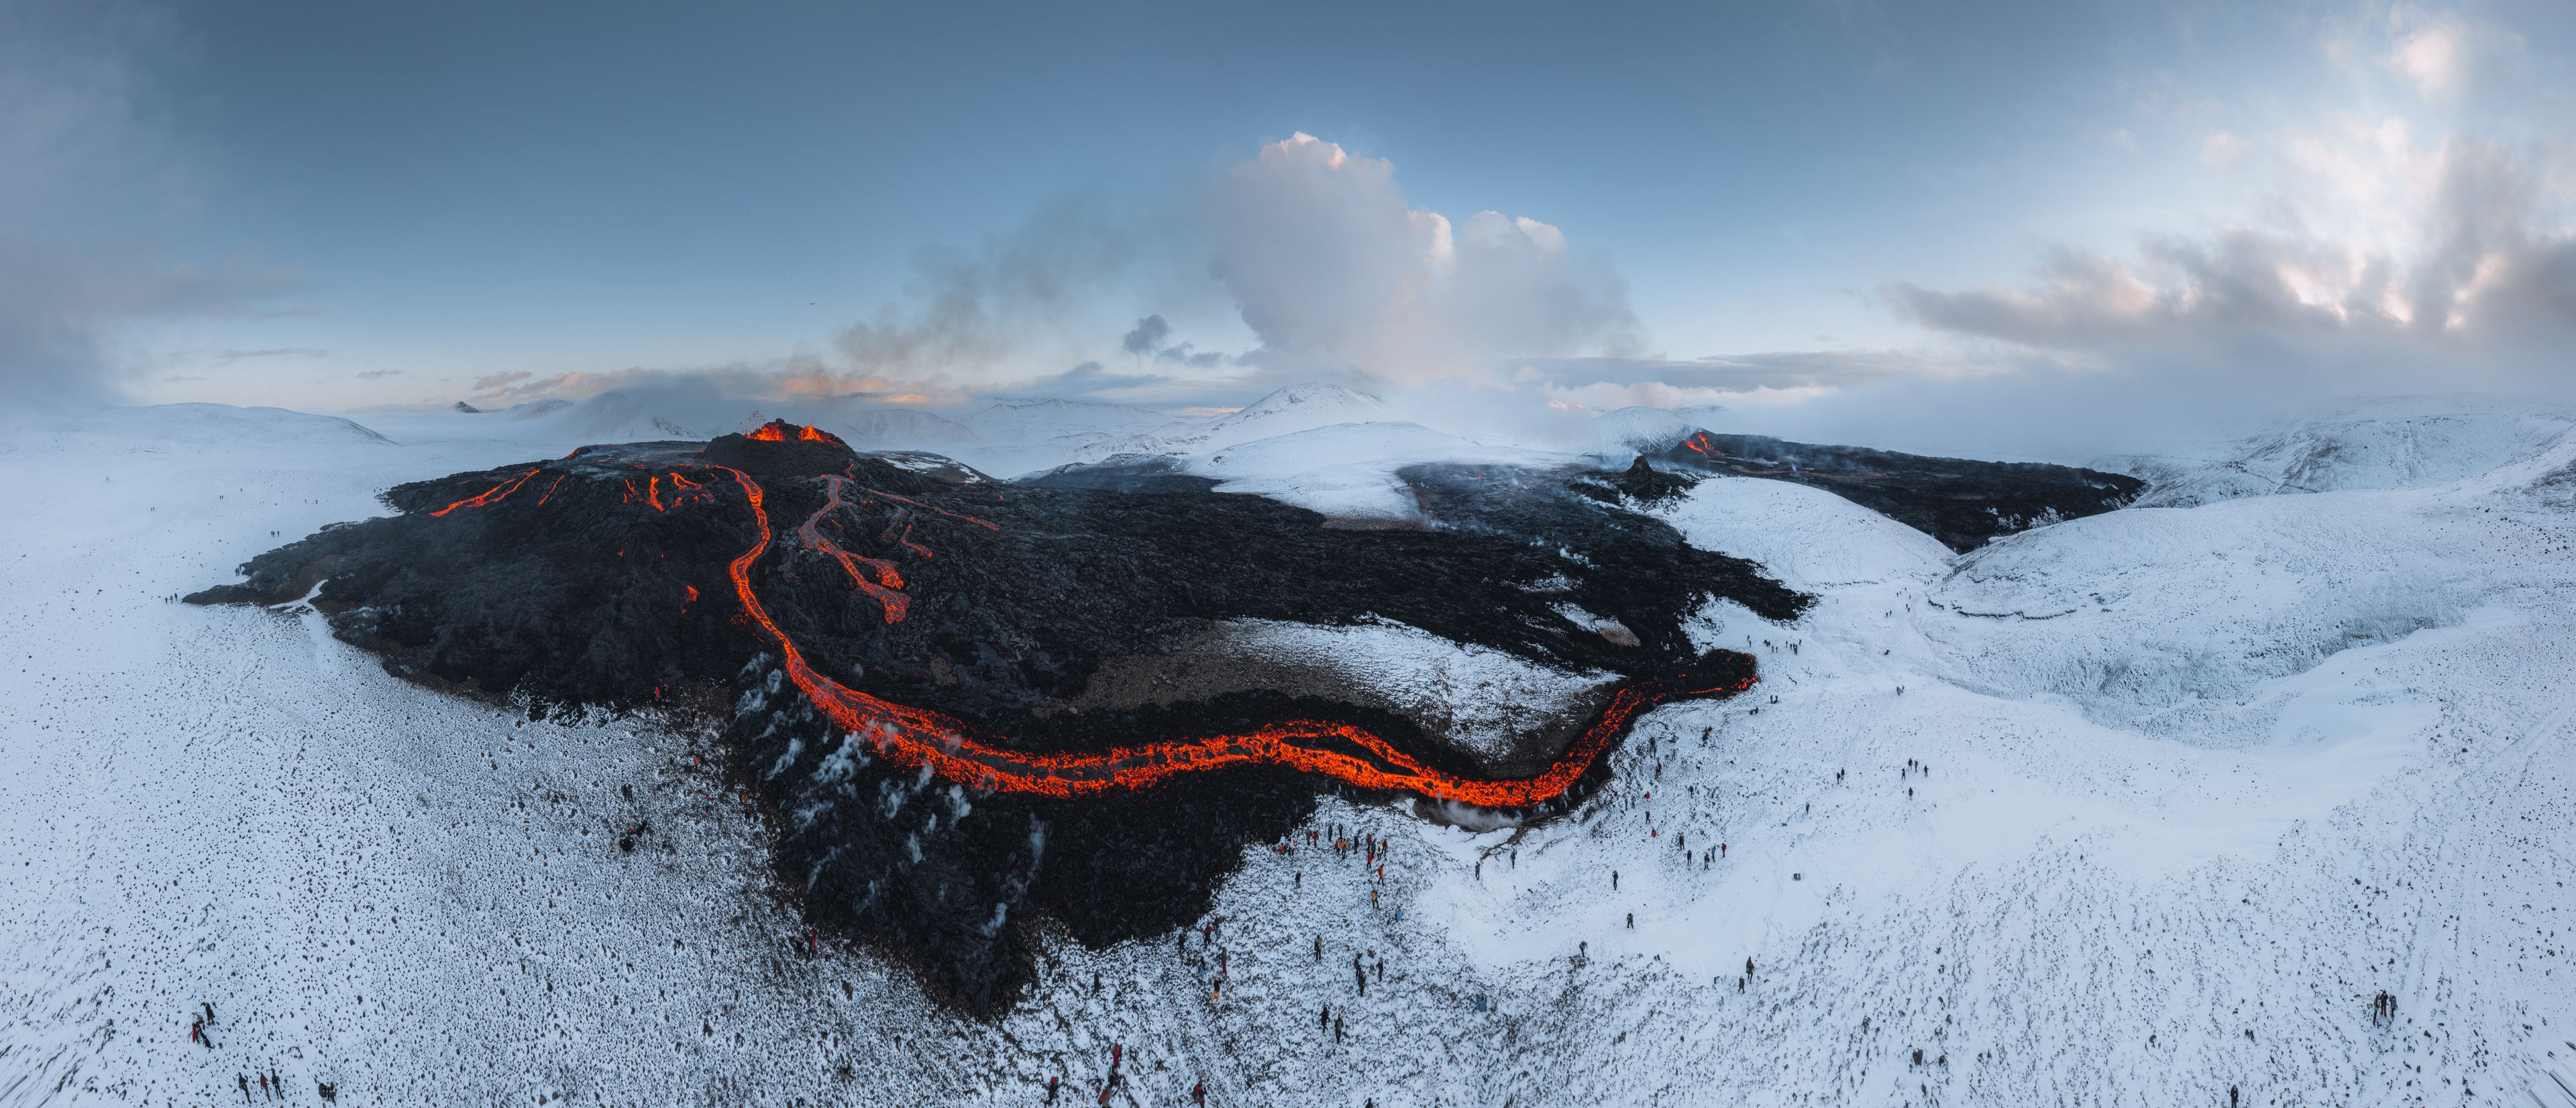 A stunning image of the Fagradalsfjall volcano eruption, one of the most popular Iceland volcanoes